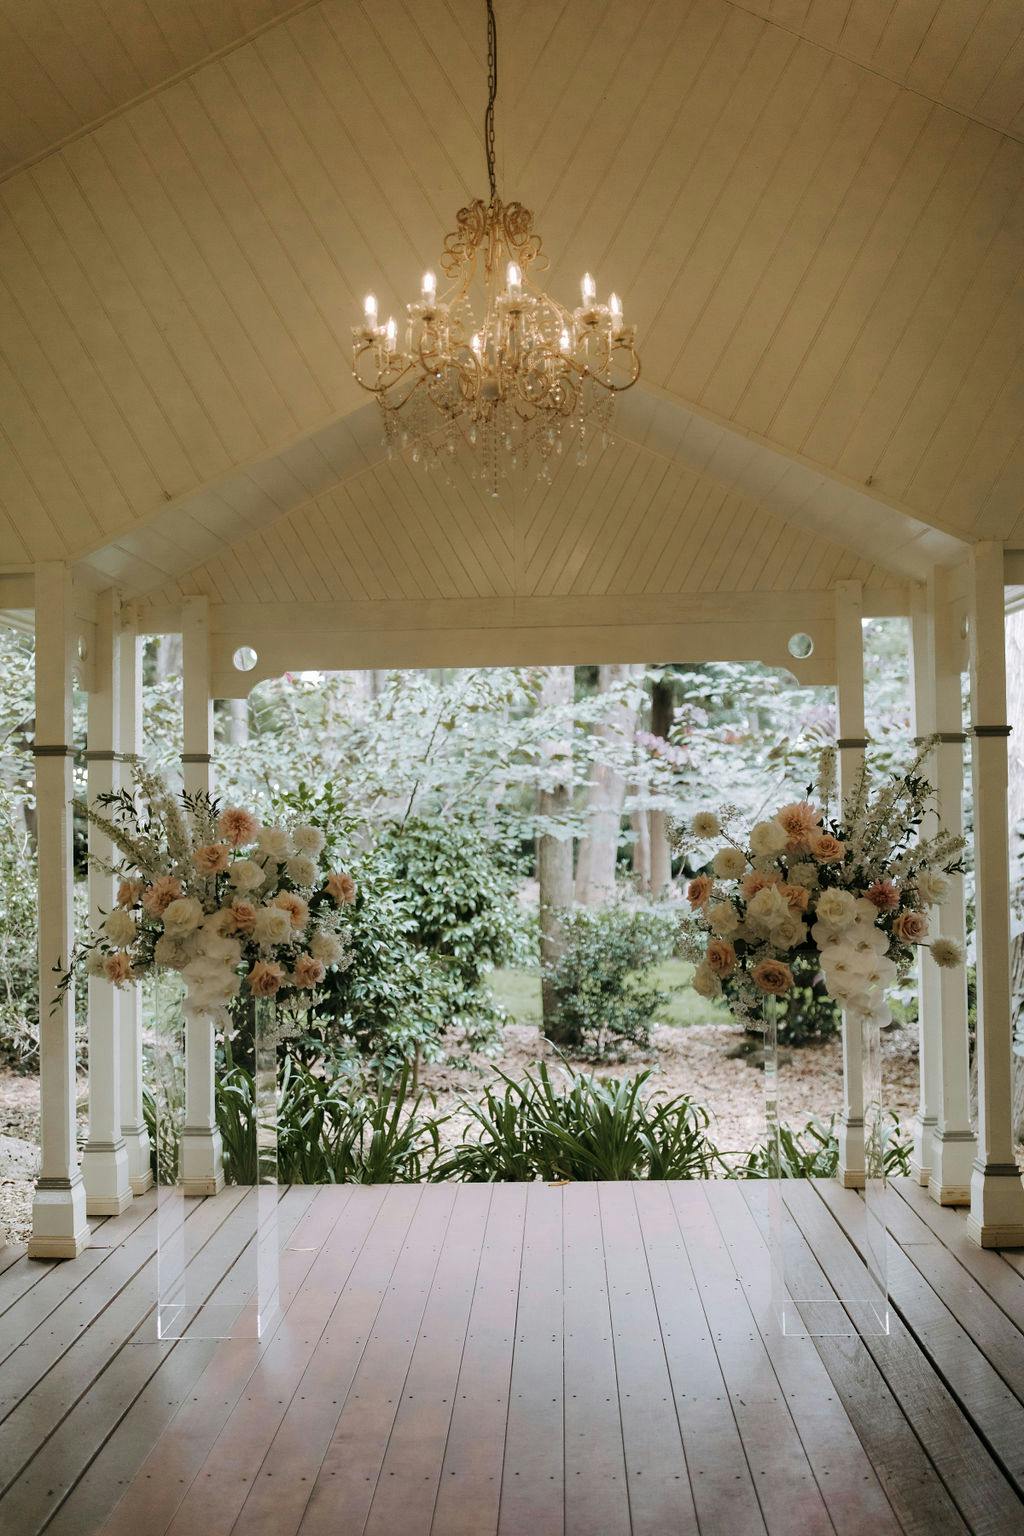 An elegant wedding altar setting featuring a wooden pavilion adorned with a golden chandelier hanging from the ceiling. Two large, flower arrangements with white and pastel flowers stand on transparent pedestals on either side of the altar area, framed by greenery.